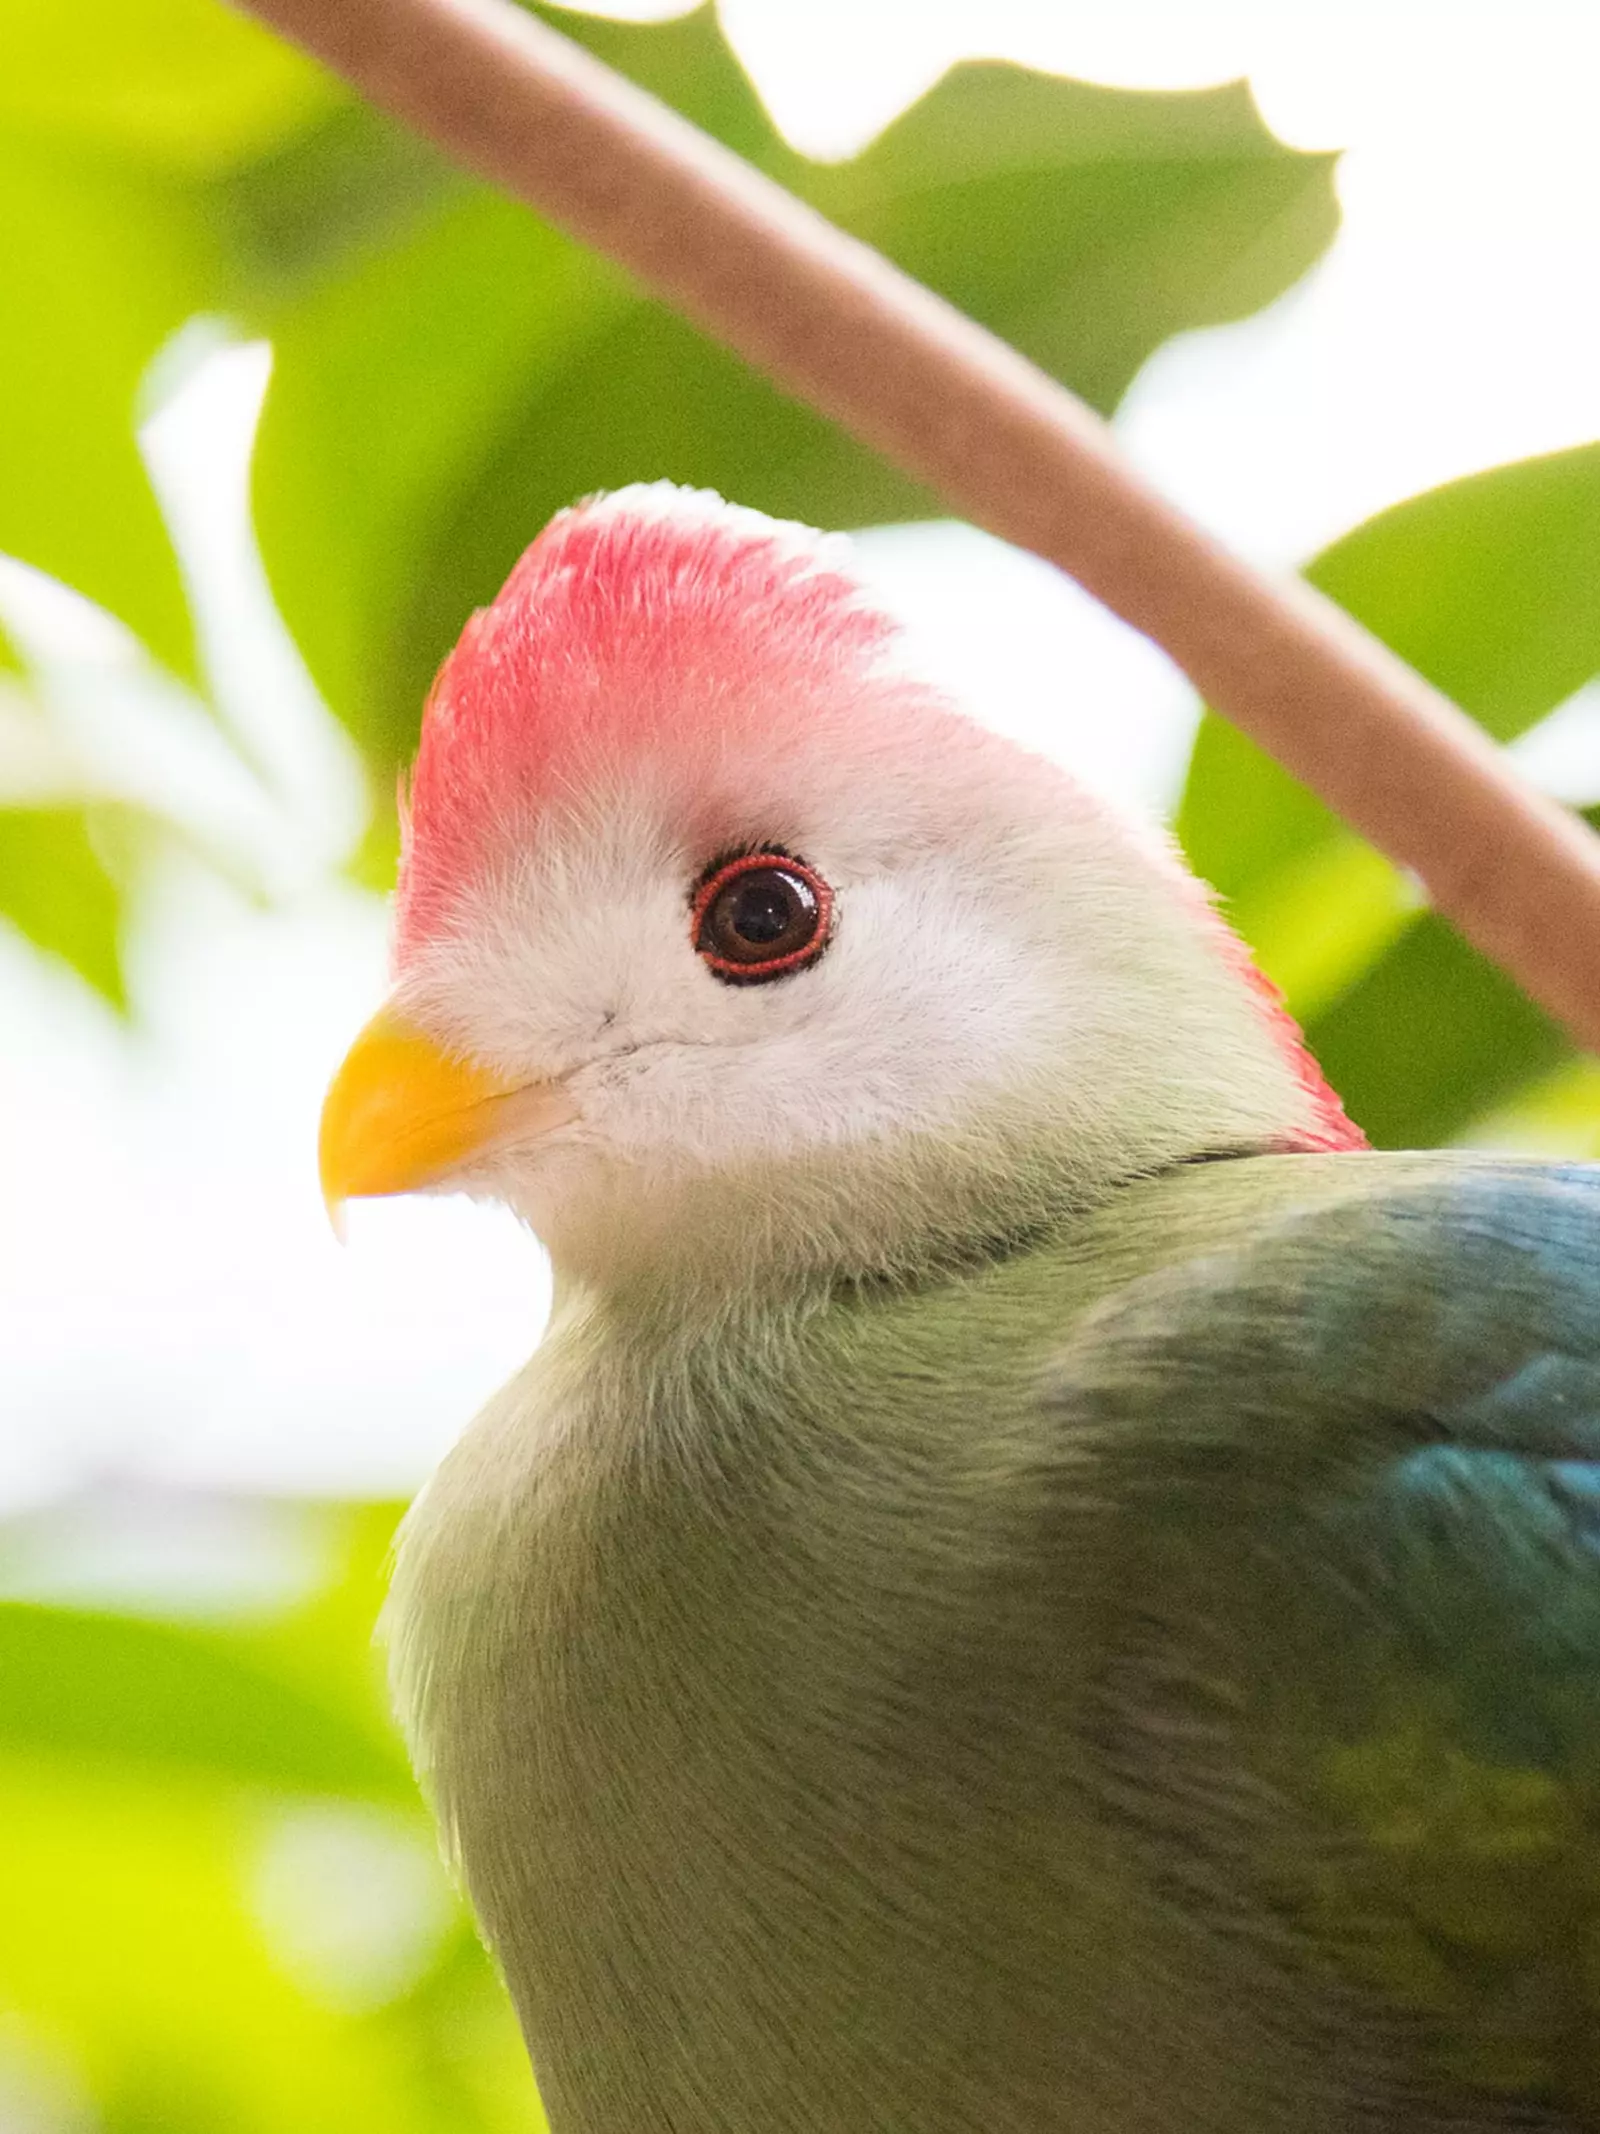 Red-crested turaco at London Zoo